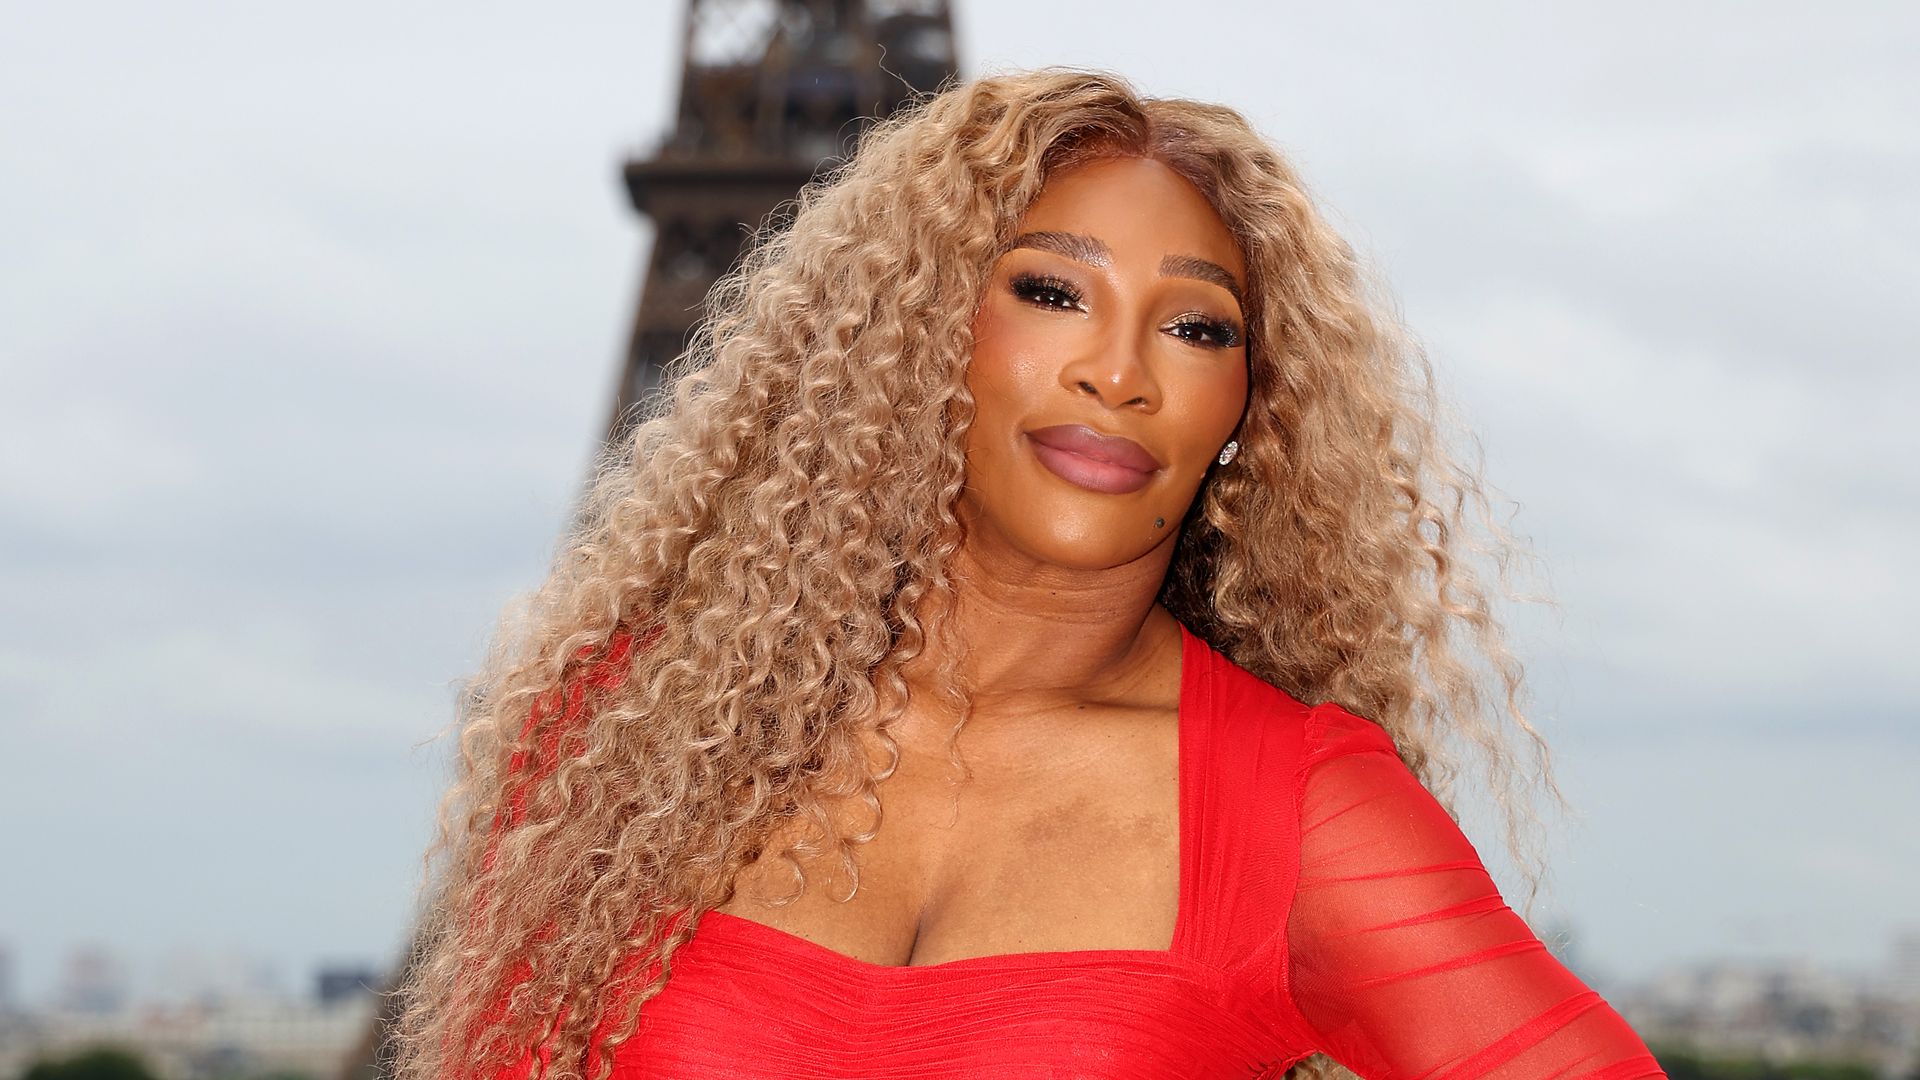 Serena Williams attends the red carpet before the opening ceremony of the Olympic Games Paris 2024 on July 26, 2024, in Paris, France. (Photo by Matthew Stockman/Getty Images)